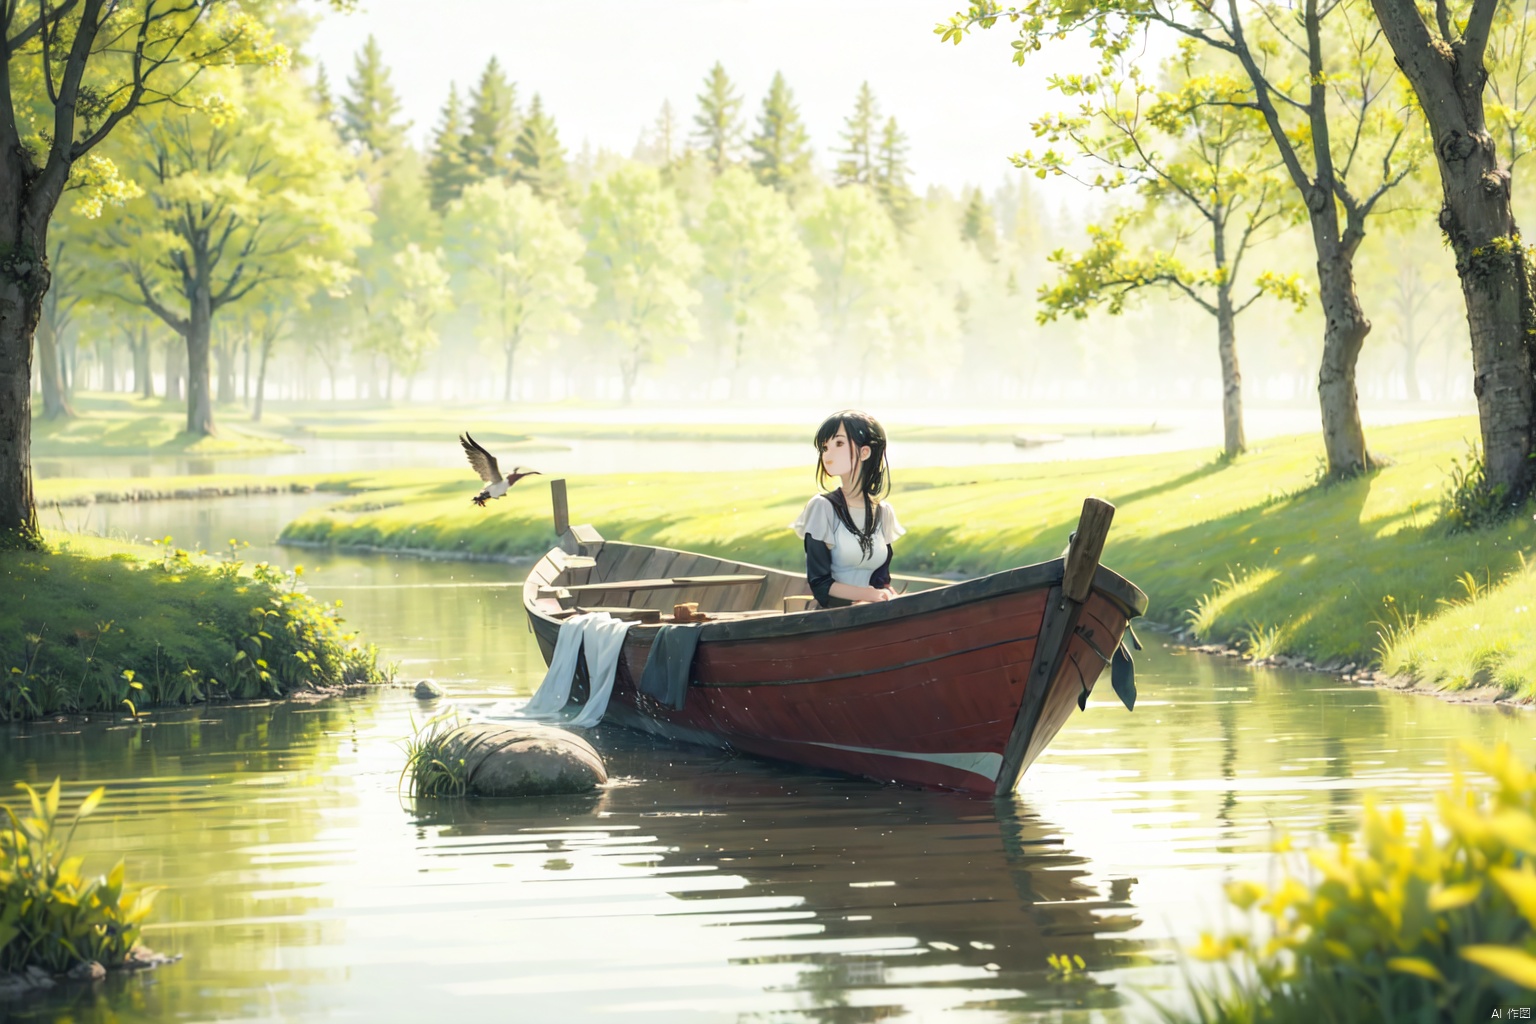  capture a serene early spring scene on a misty lake with a girl in a white dress on a wooden boat. trees with fresh green buds line the shore. above, a pair of swallows fly among young willow branches. the atmosphere is calm and expectant, signaling the awakening of nature, gf, ycbh